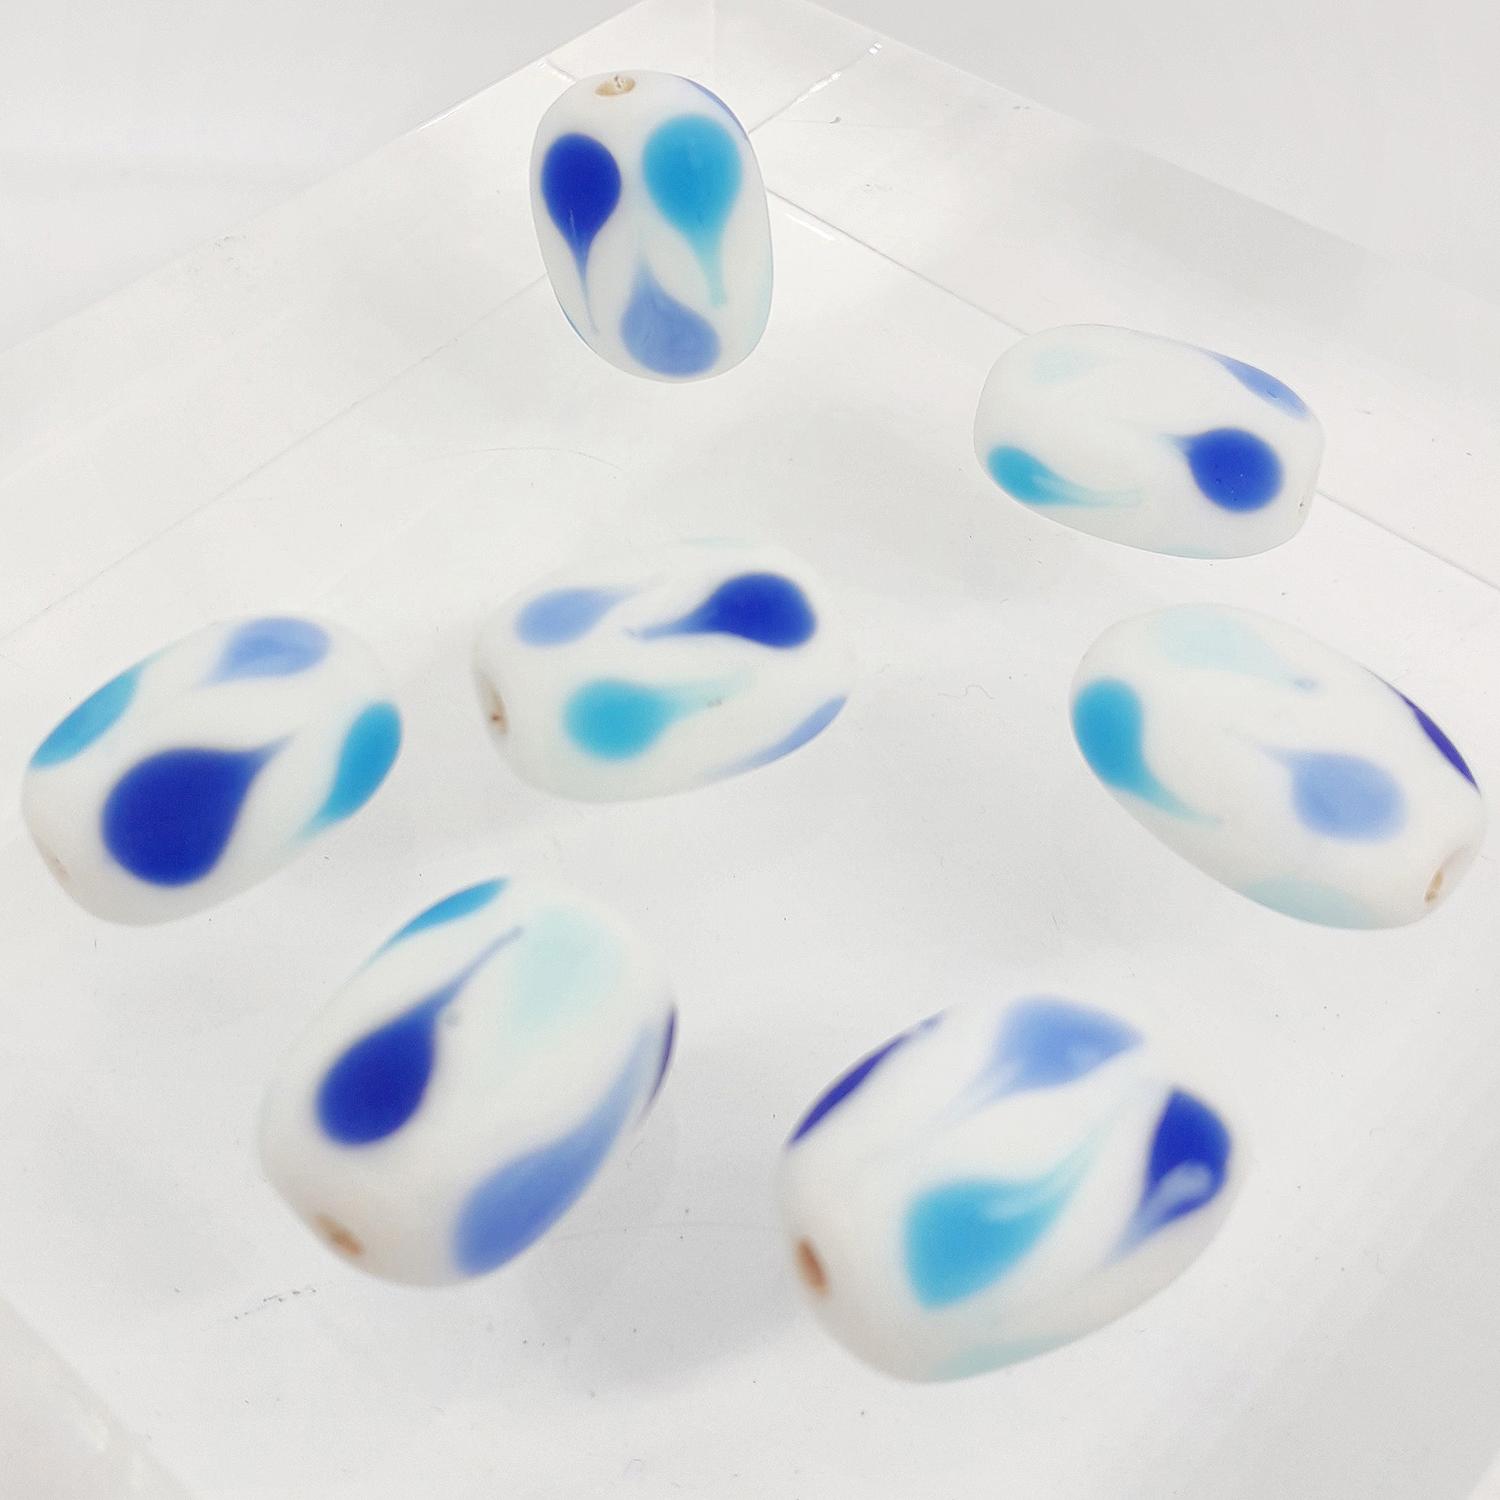 18x11mm Matte White Rounded Rectangle Bead with Matte Blues Teardrop Design